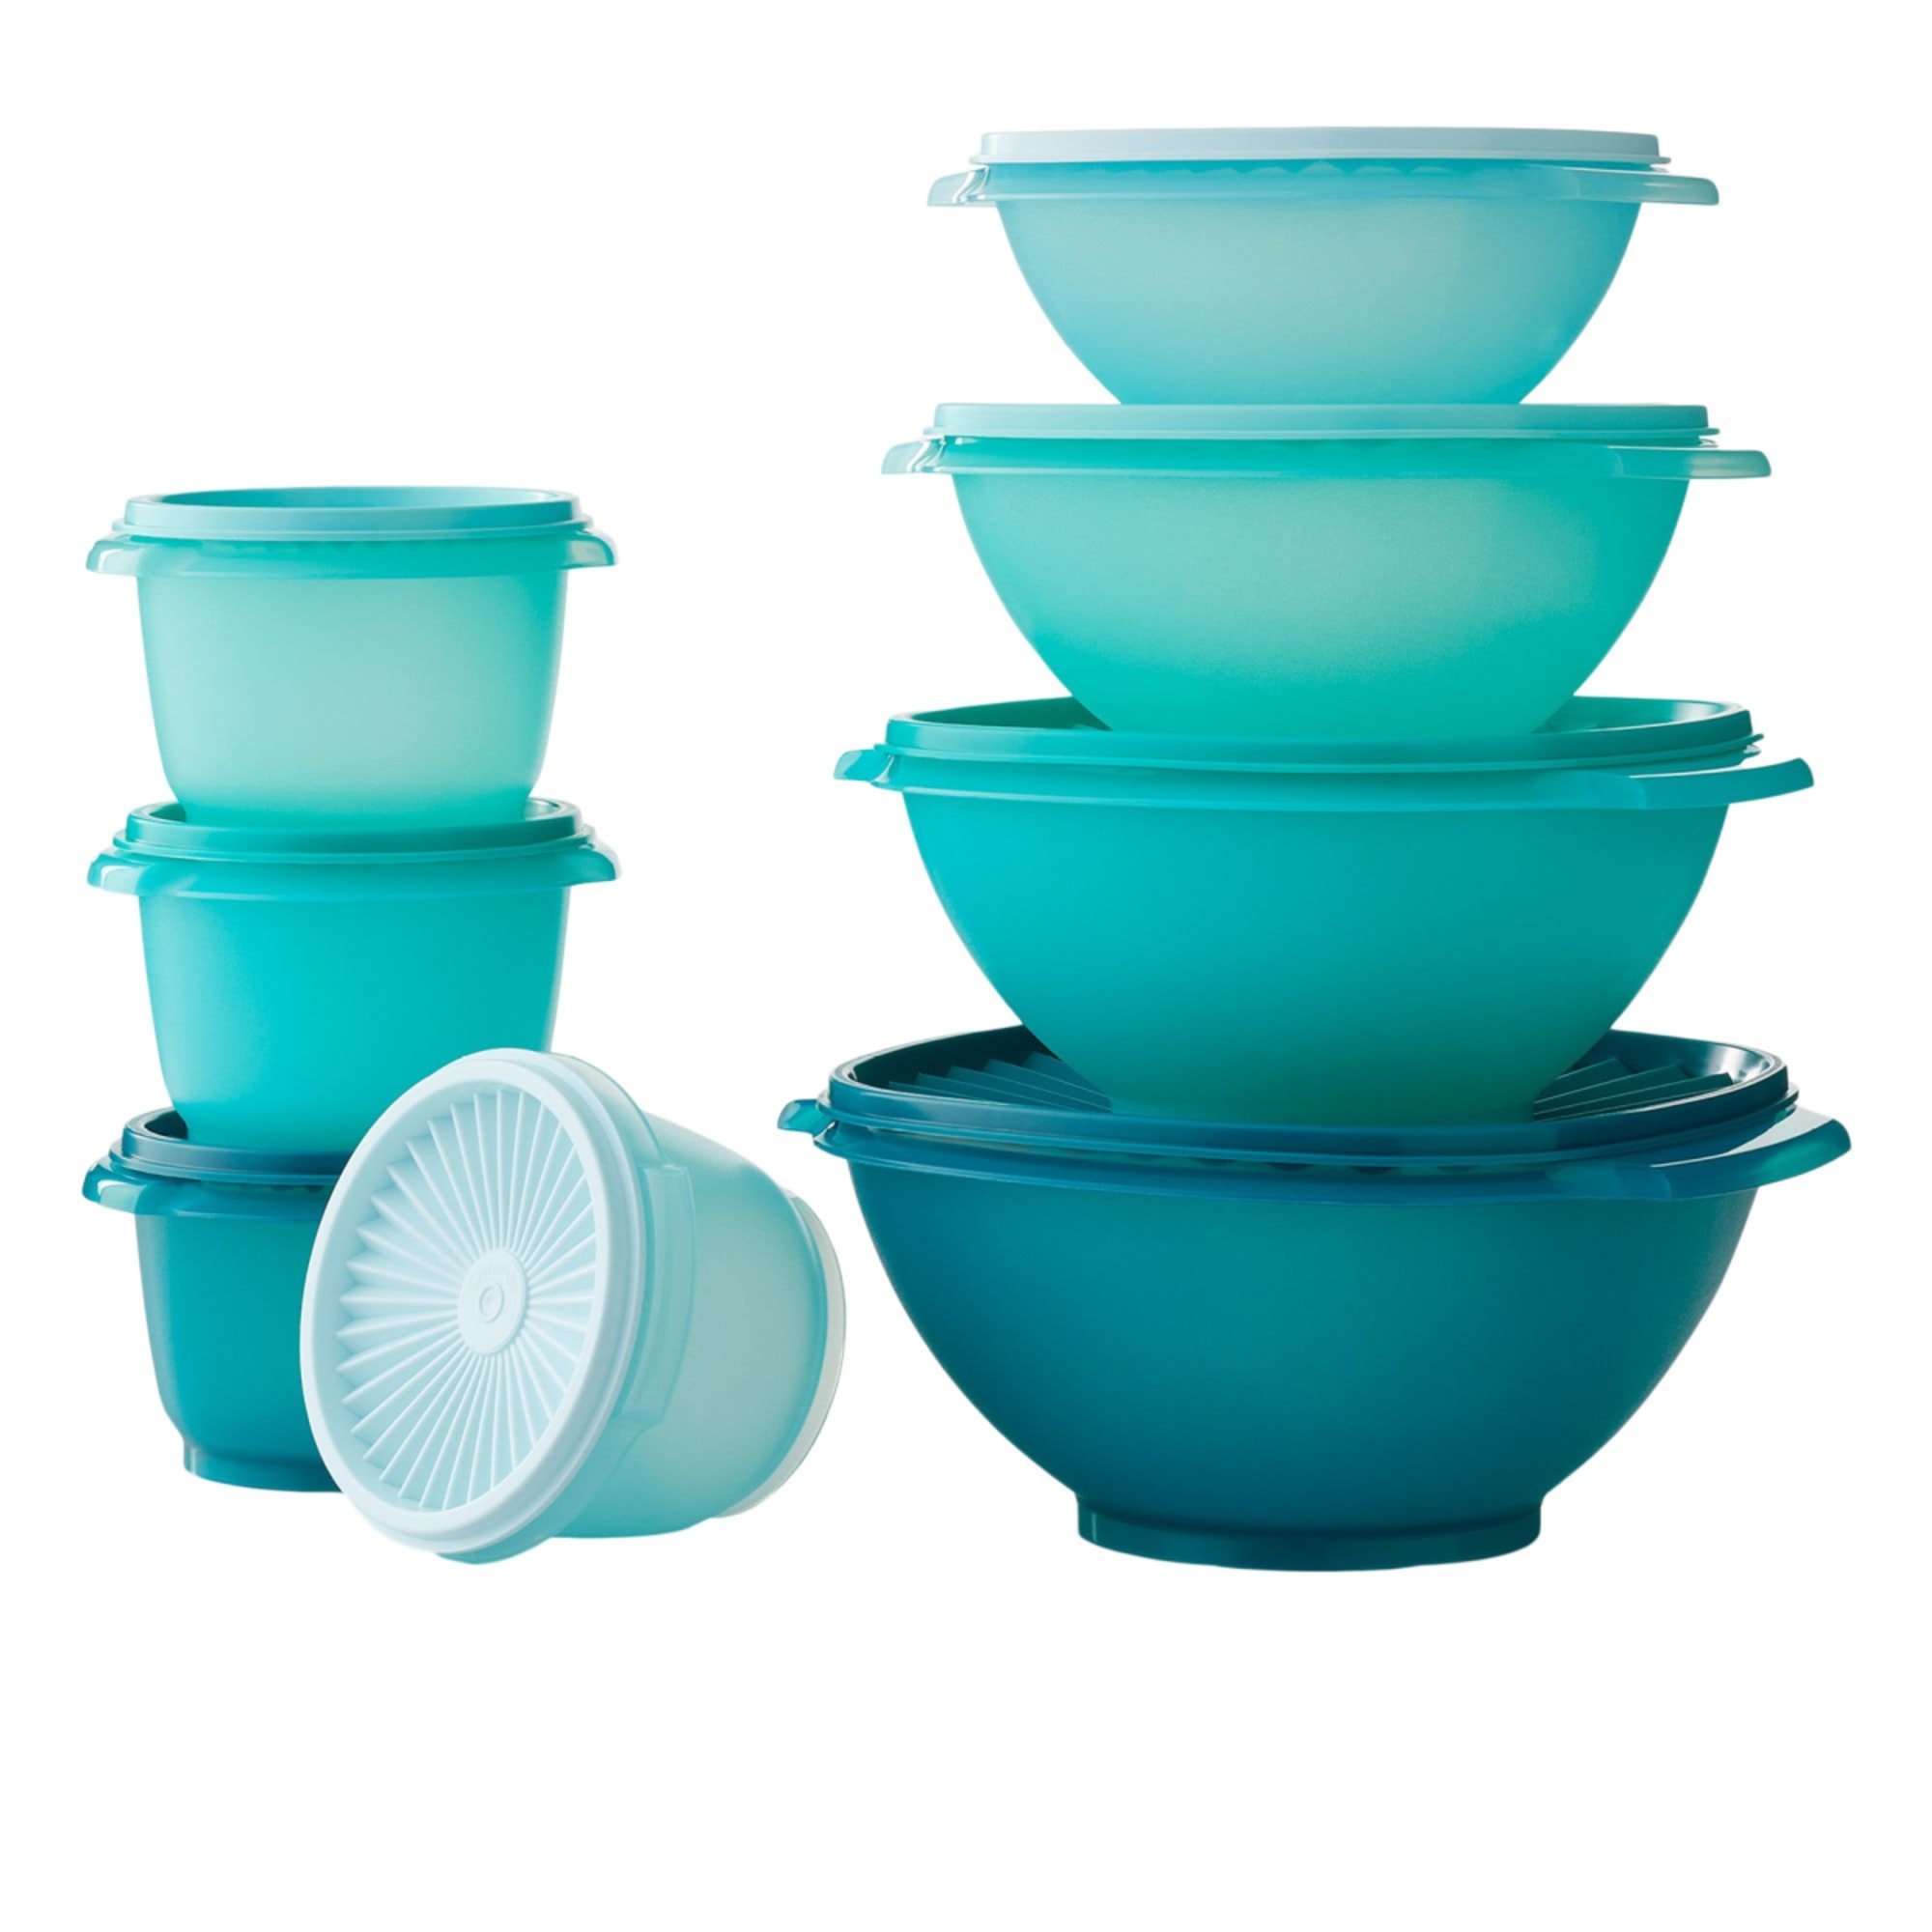 https://res.cloudinary.com/kitchenwarehouse/image/upload/c_fill,g_face,w_1250/f_auto/t_PDP_2000x2000/Supplier%20Images%20/2000px/Tupperware-Heritage-Storage-Bowl-Set-8pc-Green_1_2000px.jpg?imagetype=pdp_full